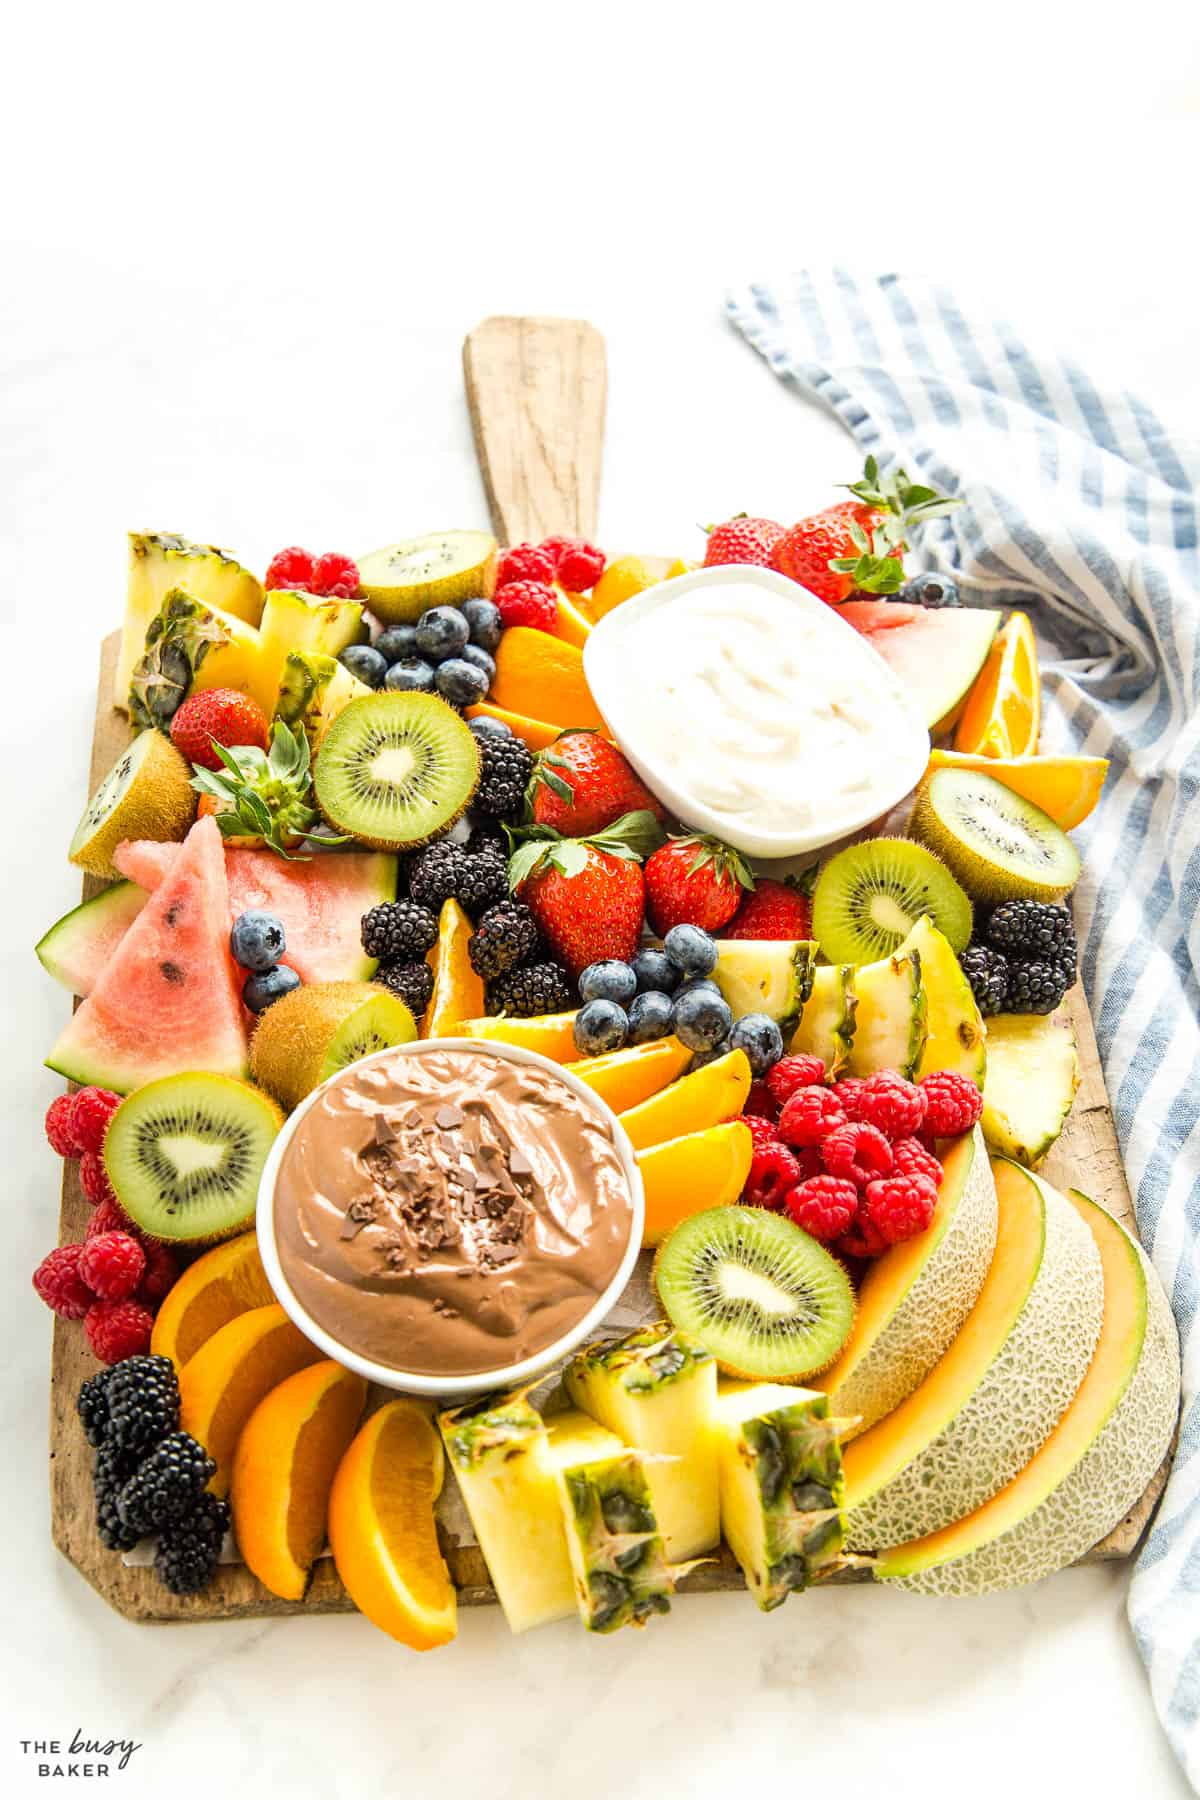 pineapple, kiwi, melons, and berries on a wooden board